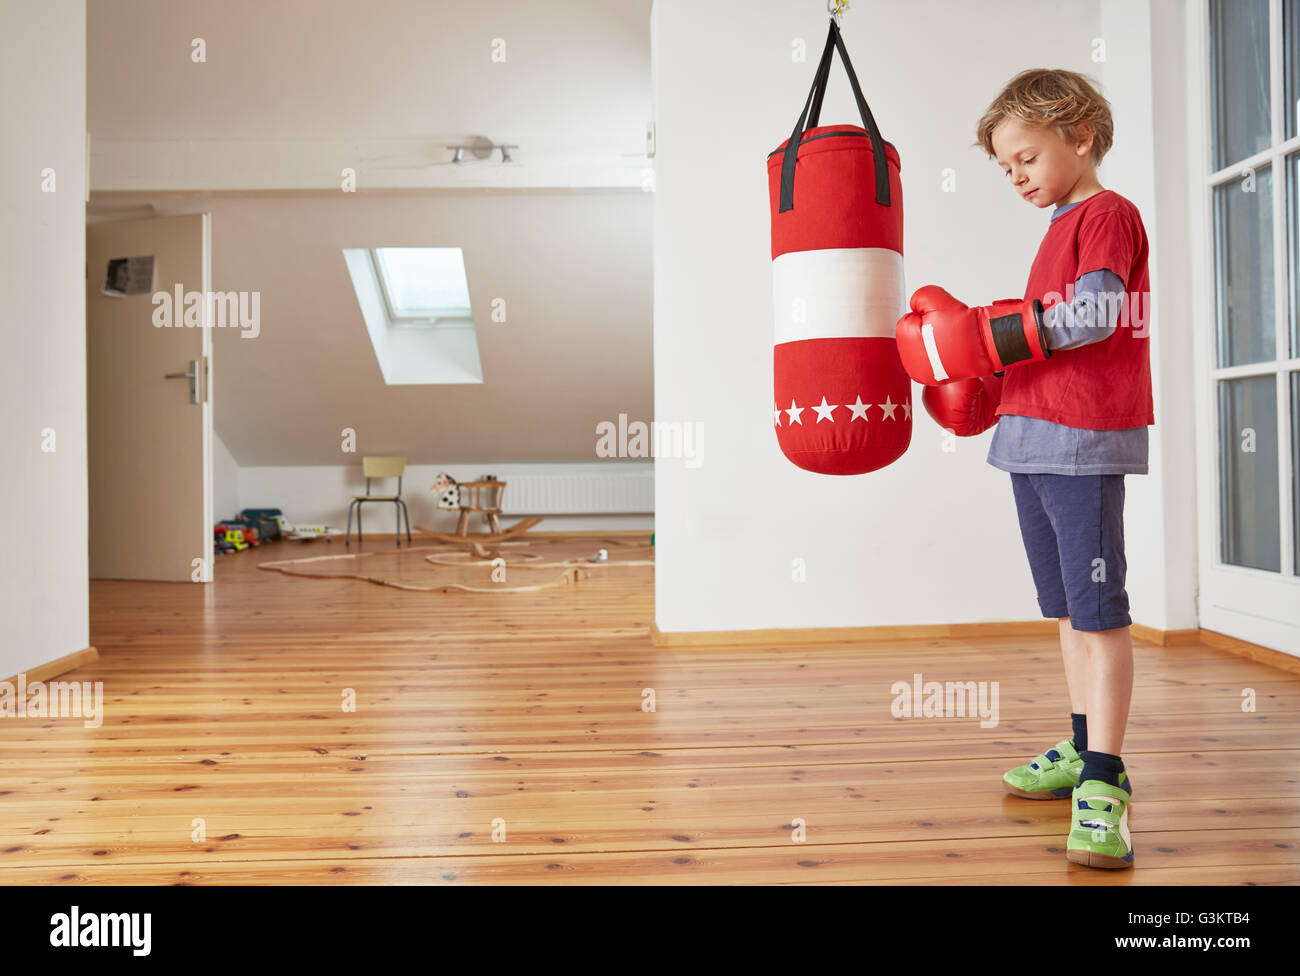 Boy with punch bag putting on boxing gloves Stock Photo